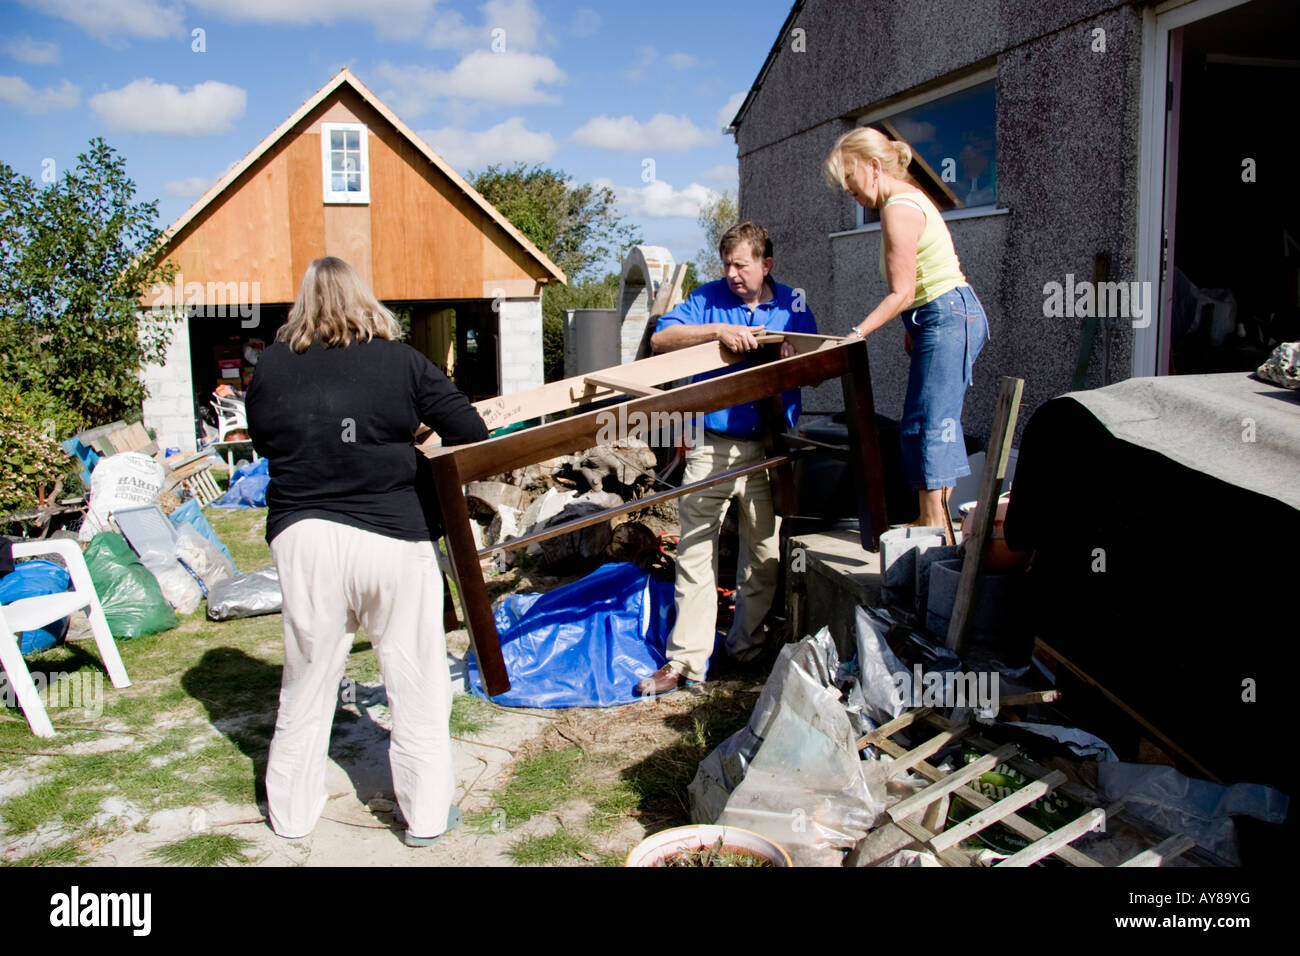 Mature man and women carrying furniture from a house Stock Photo